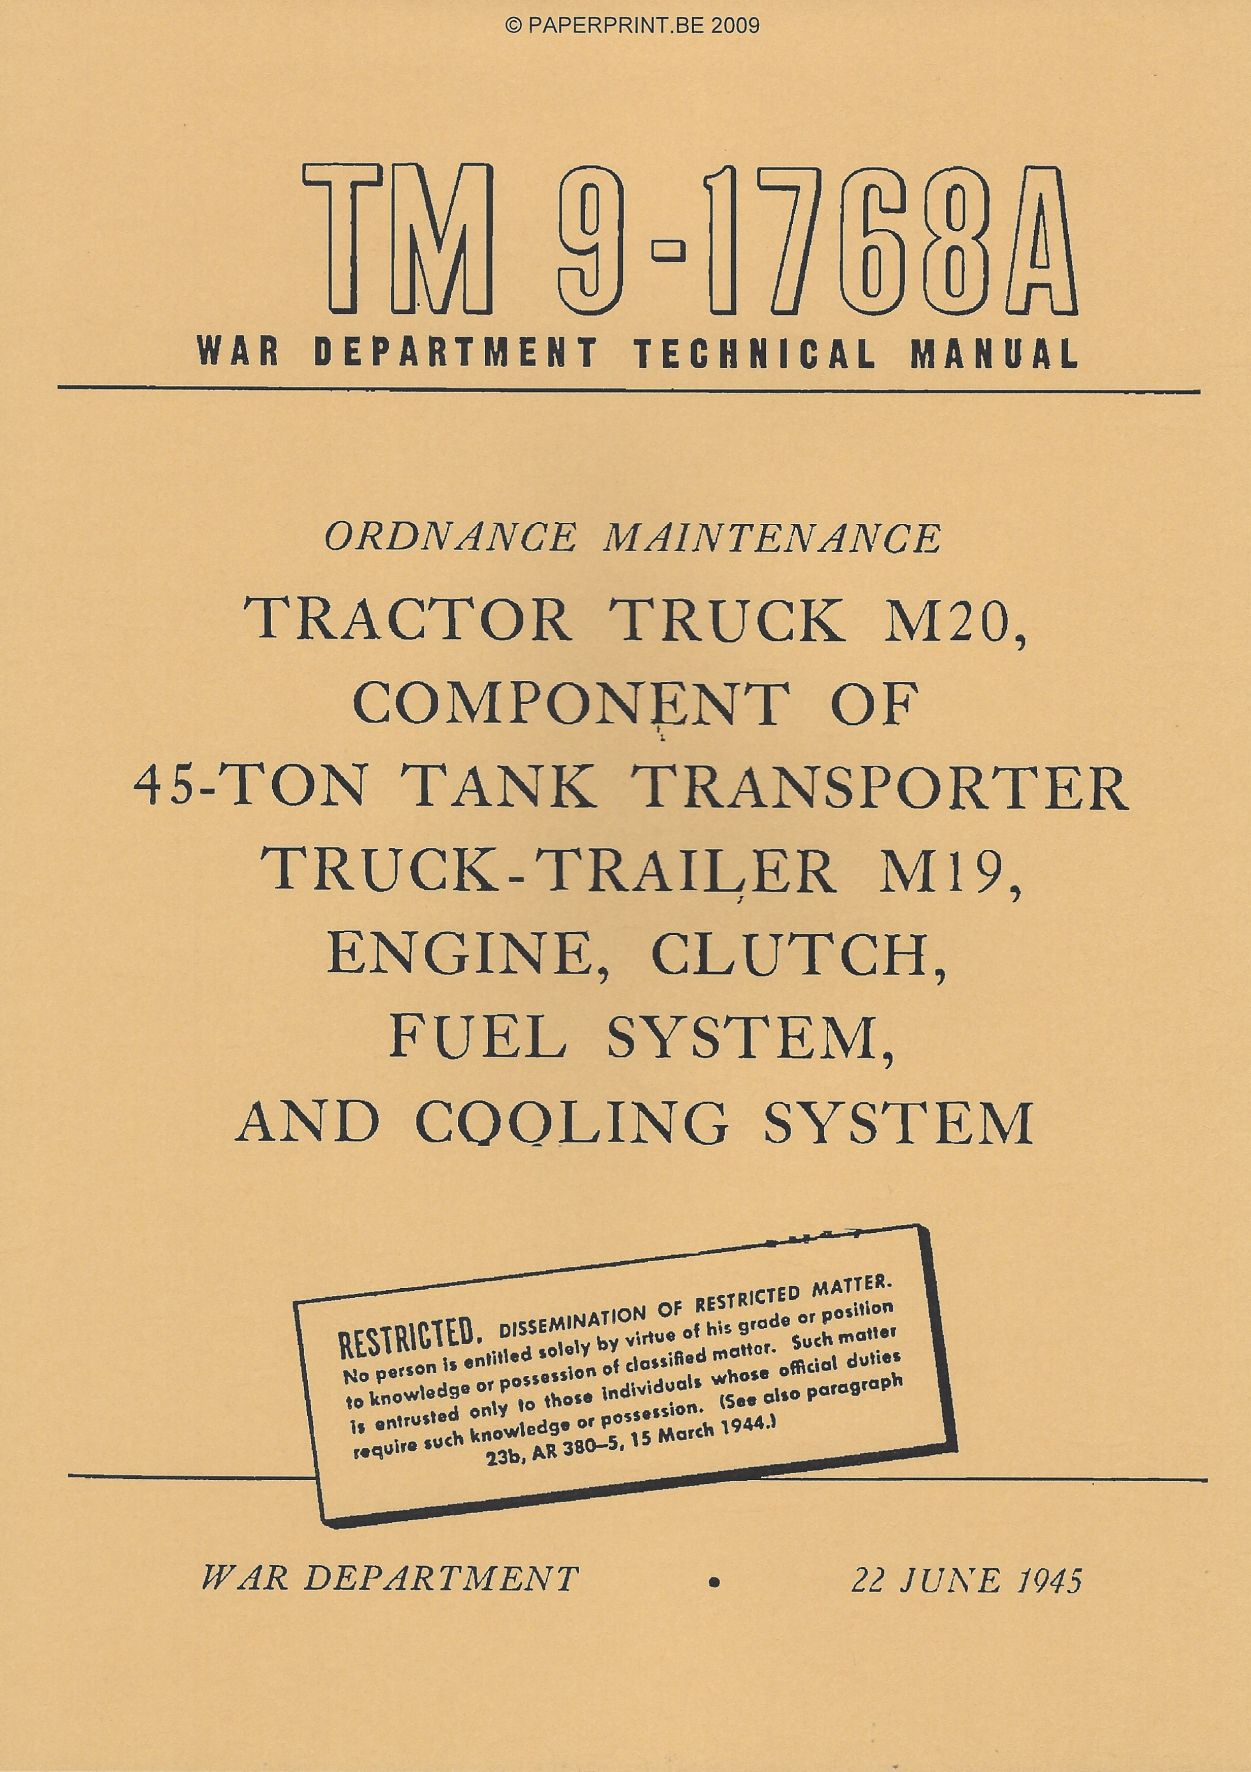 TM 9-1768A US TRACTOR TRUCK M20, COMPONENT OF 45-TON TANK TRANSPORTER TRUCK-TRAILER M19 ENGINE, CLUTCH, FUEL SYSTEM, AND COOLING